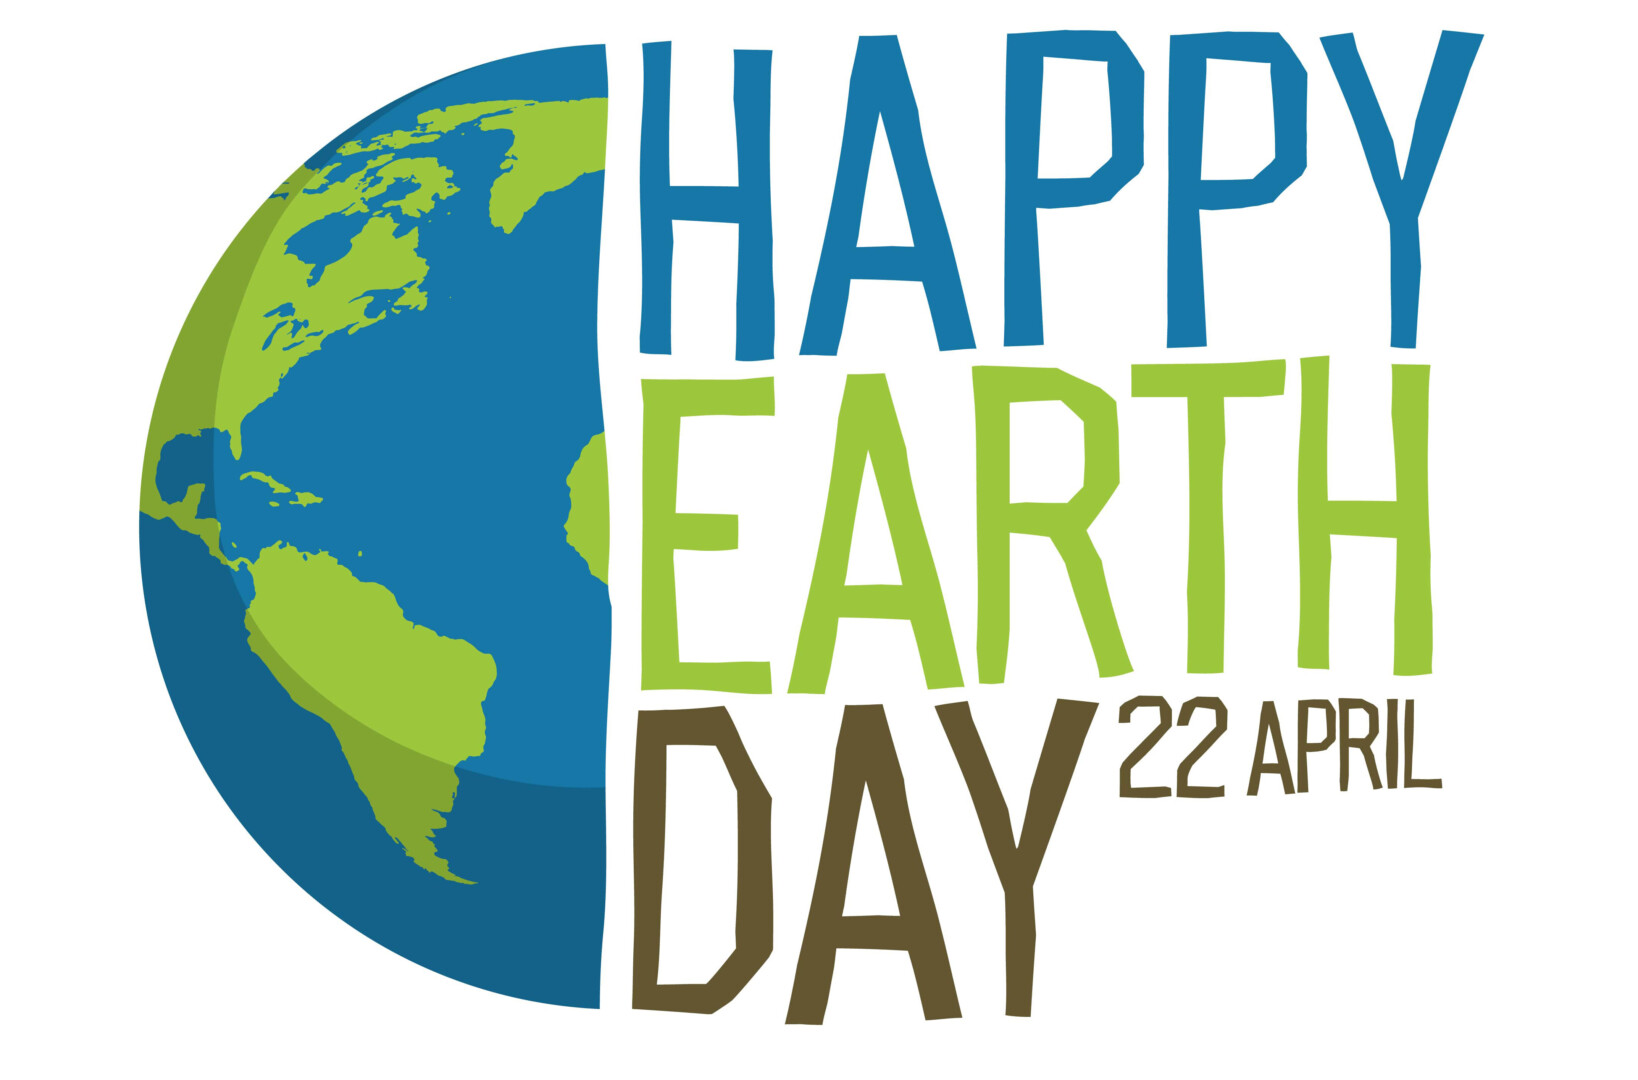 Happy Earth Day April 22nd